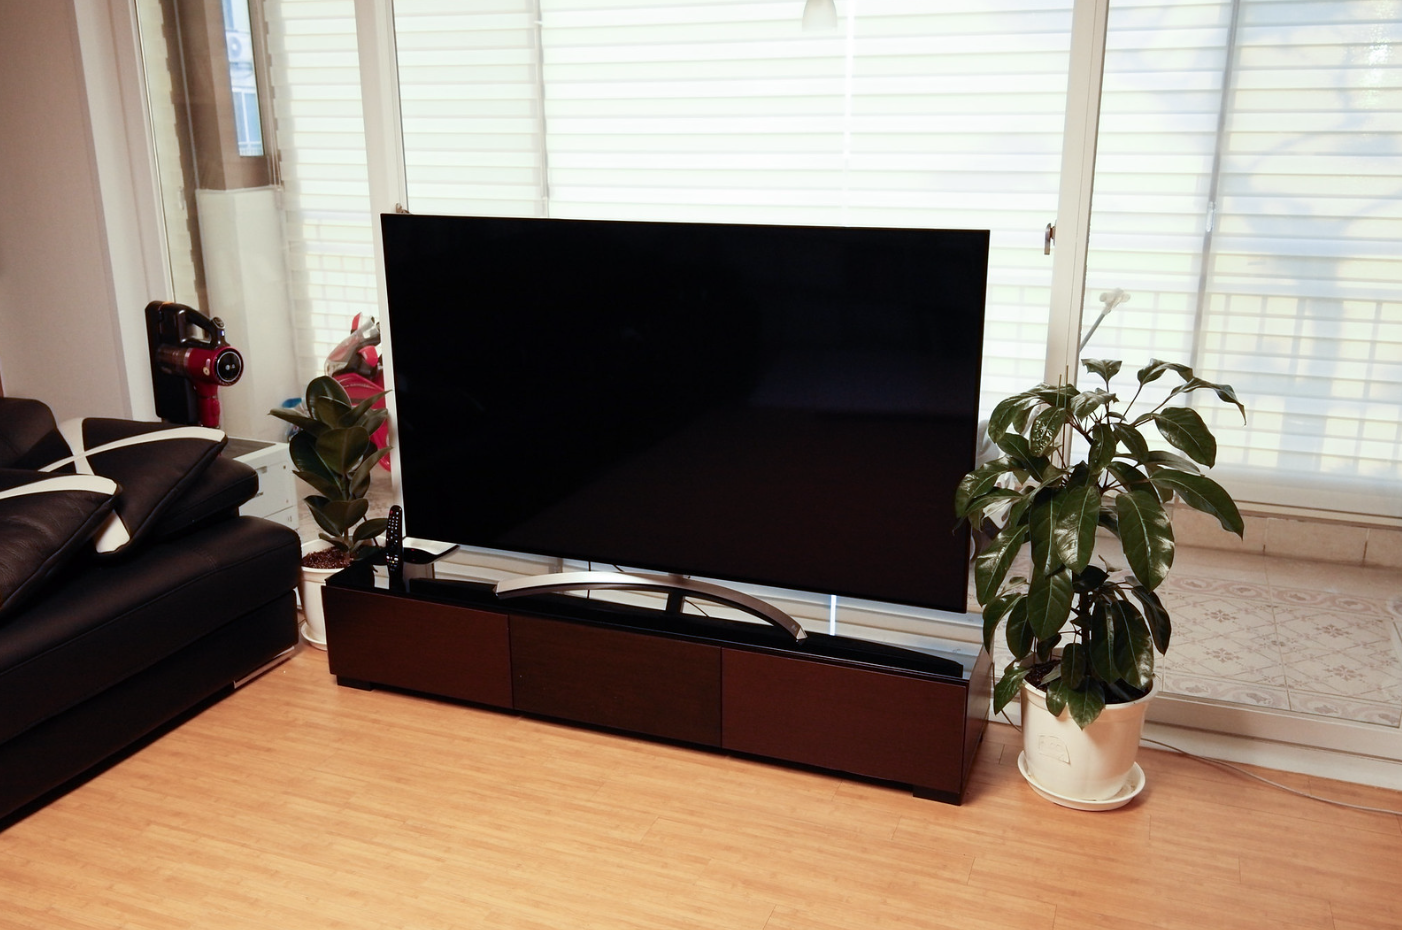 solar powered tv, high quality tv, television set up